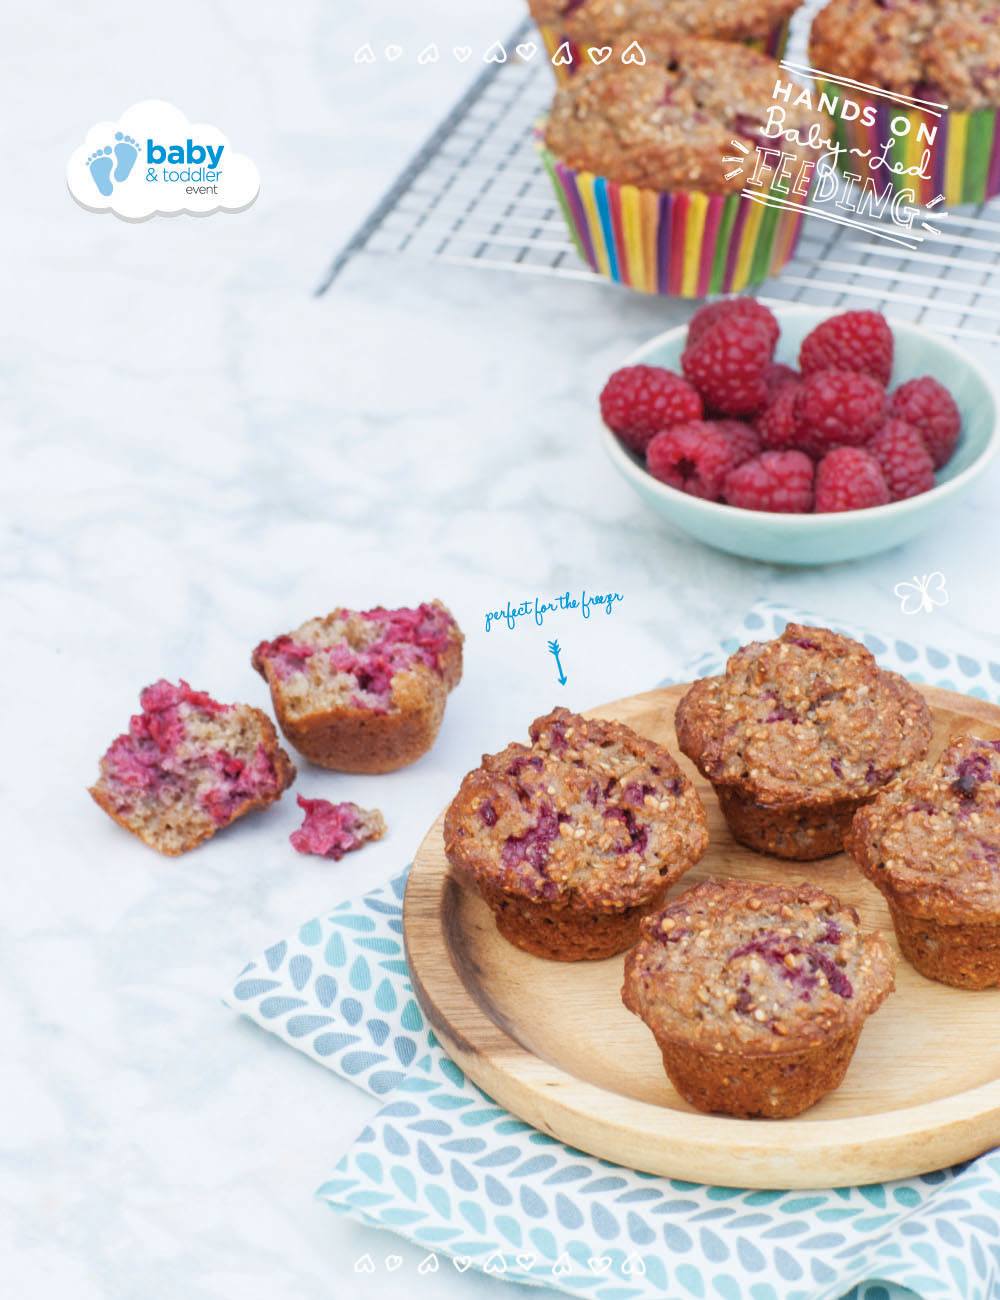 Baby Led Feeding and Dunnes Stores Healthy Breakfast Muffins. Recipe image for recipe page. A deliciously healthy, yummy breakfast for baby led weaning. This baby led weaning recipe is easy to make and so nutritious, refined sugar free treat packed with goodness.